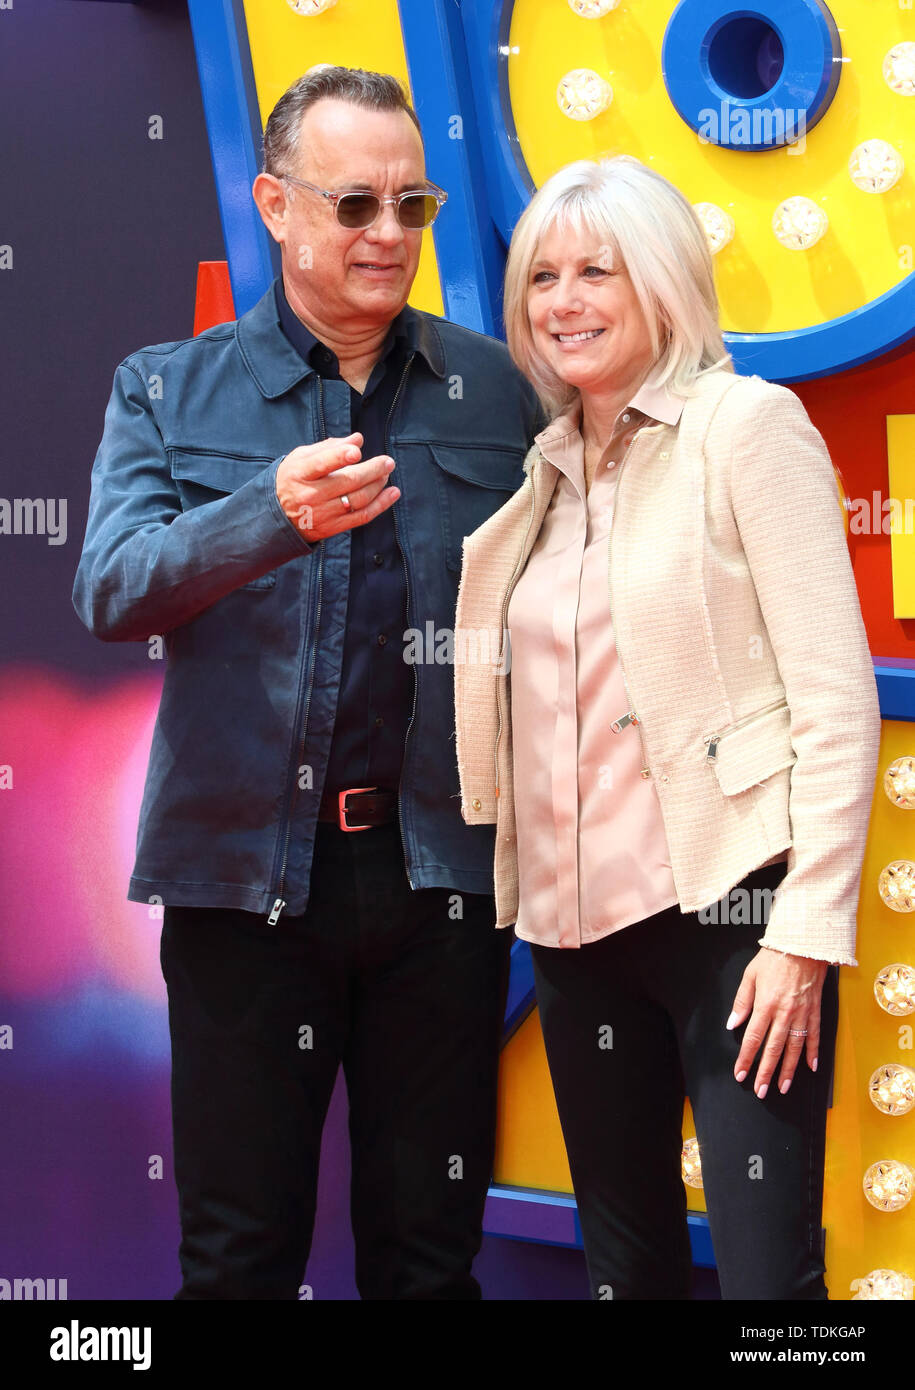 London, UK. 16th June, 2019. Tom Hanks and wife Rita Wilson attend the European Premiere of Toy Story 4 at Odeon Luxe, Leicester Square in London. Credit: SOPA Images Limited/Alamy Live News Stock Photo